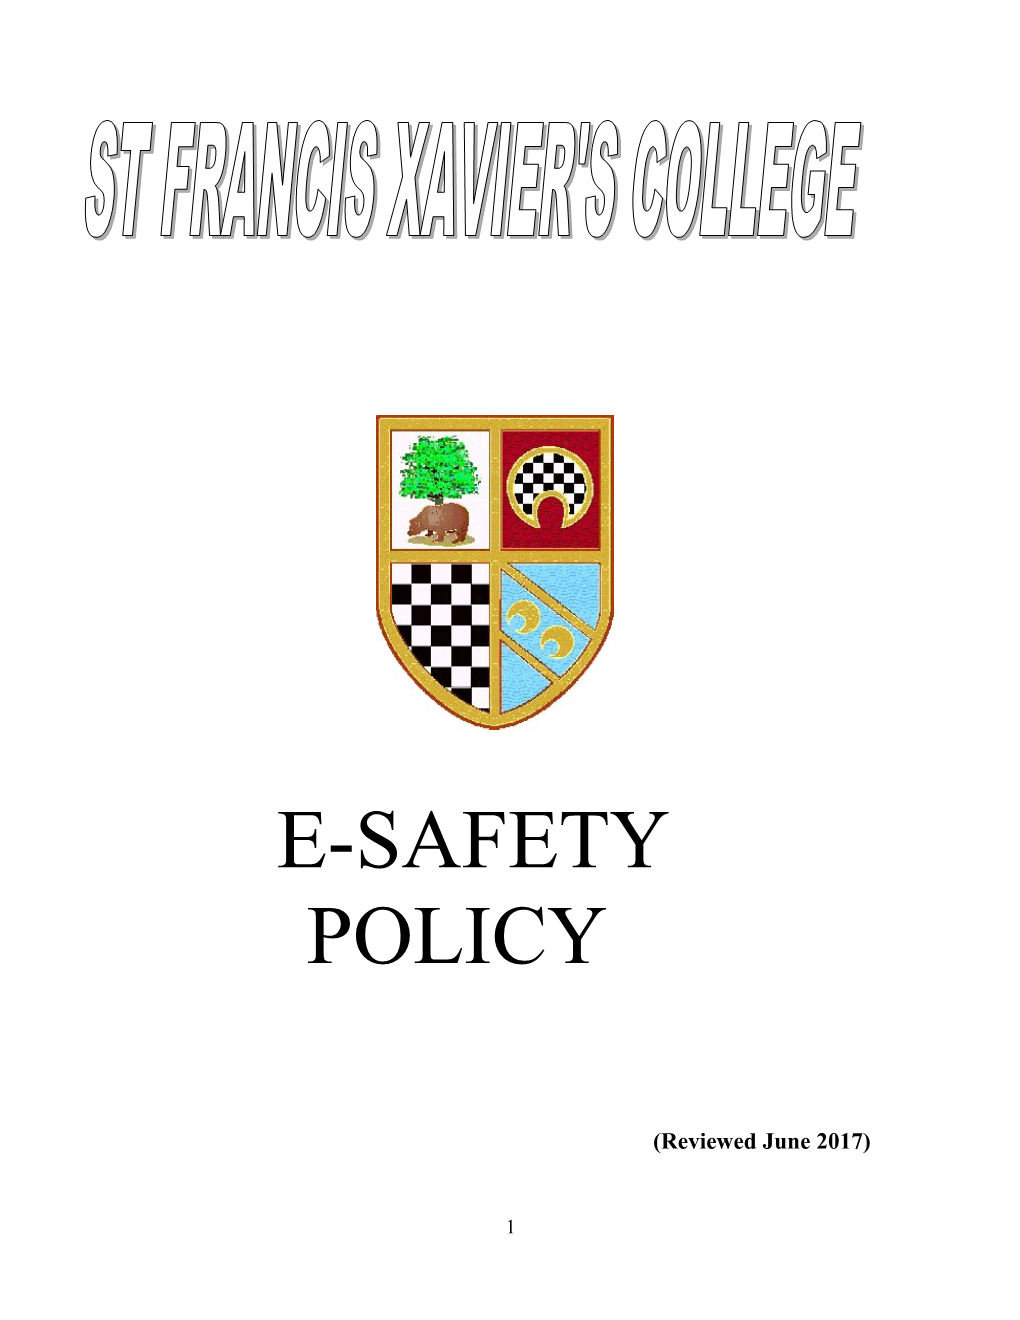 The Downs E-Safety Policy